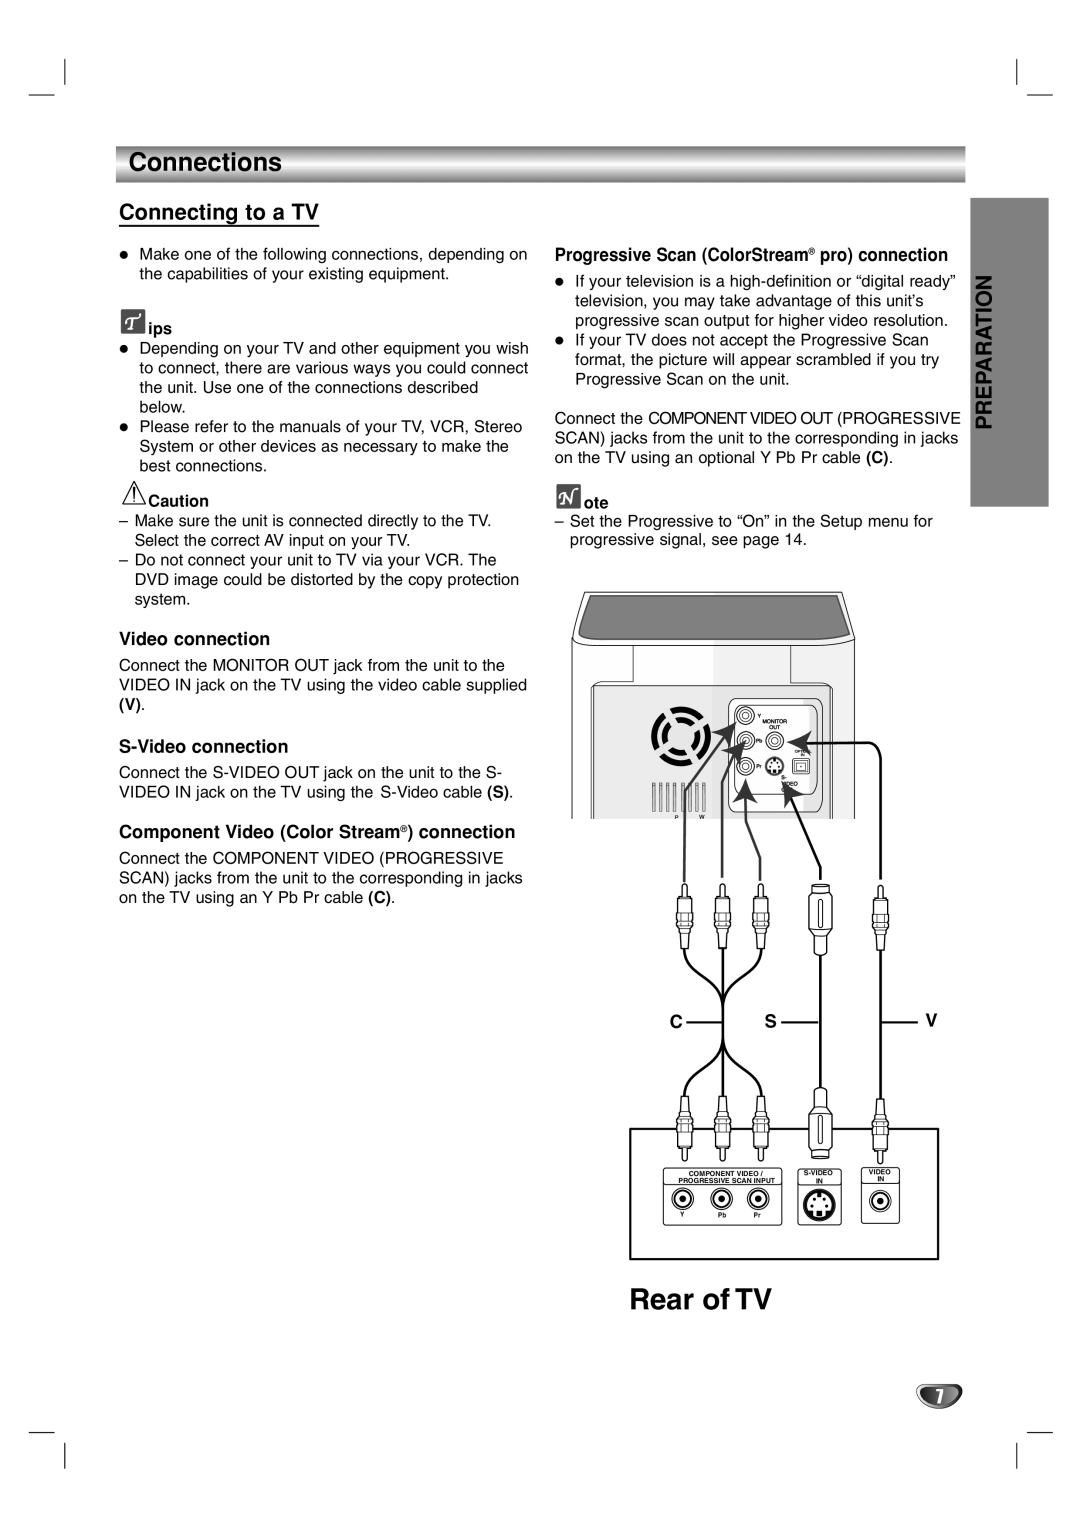 LG Electronics LF-D7150 owner manual Connections, Rear of TV, Video connection, S-Videoconnection, C Sv 